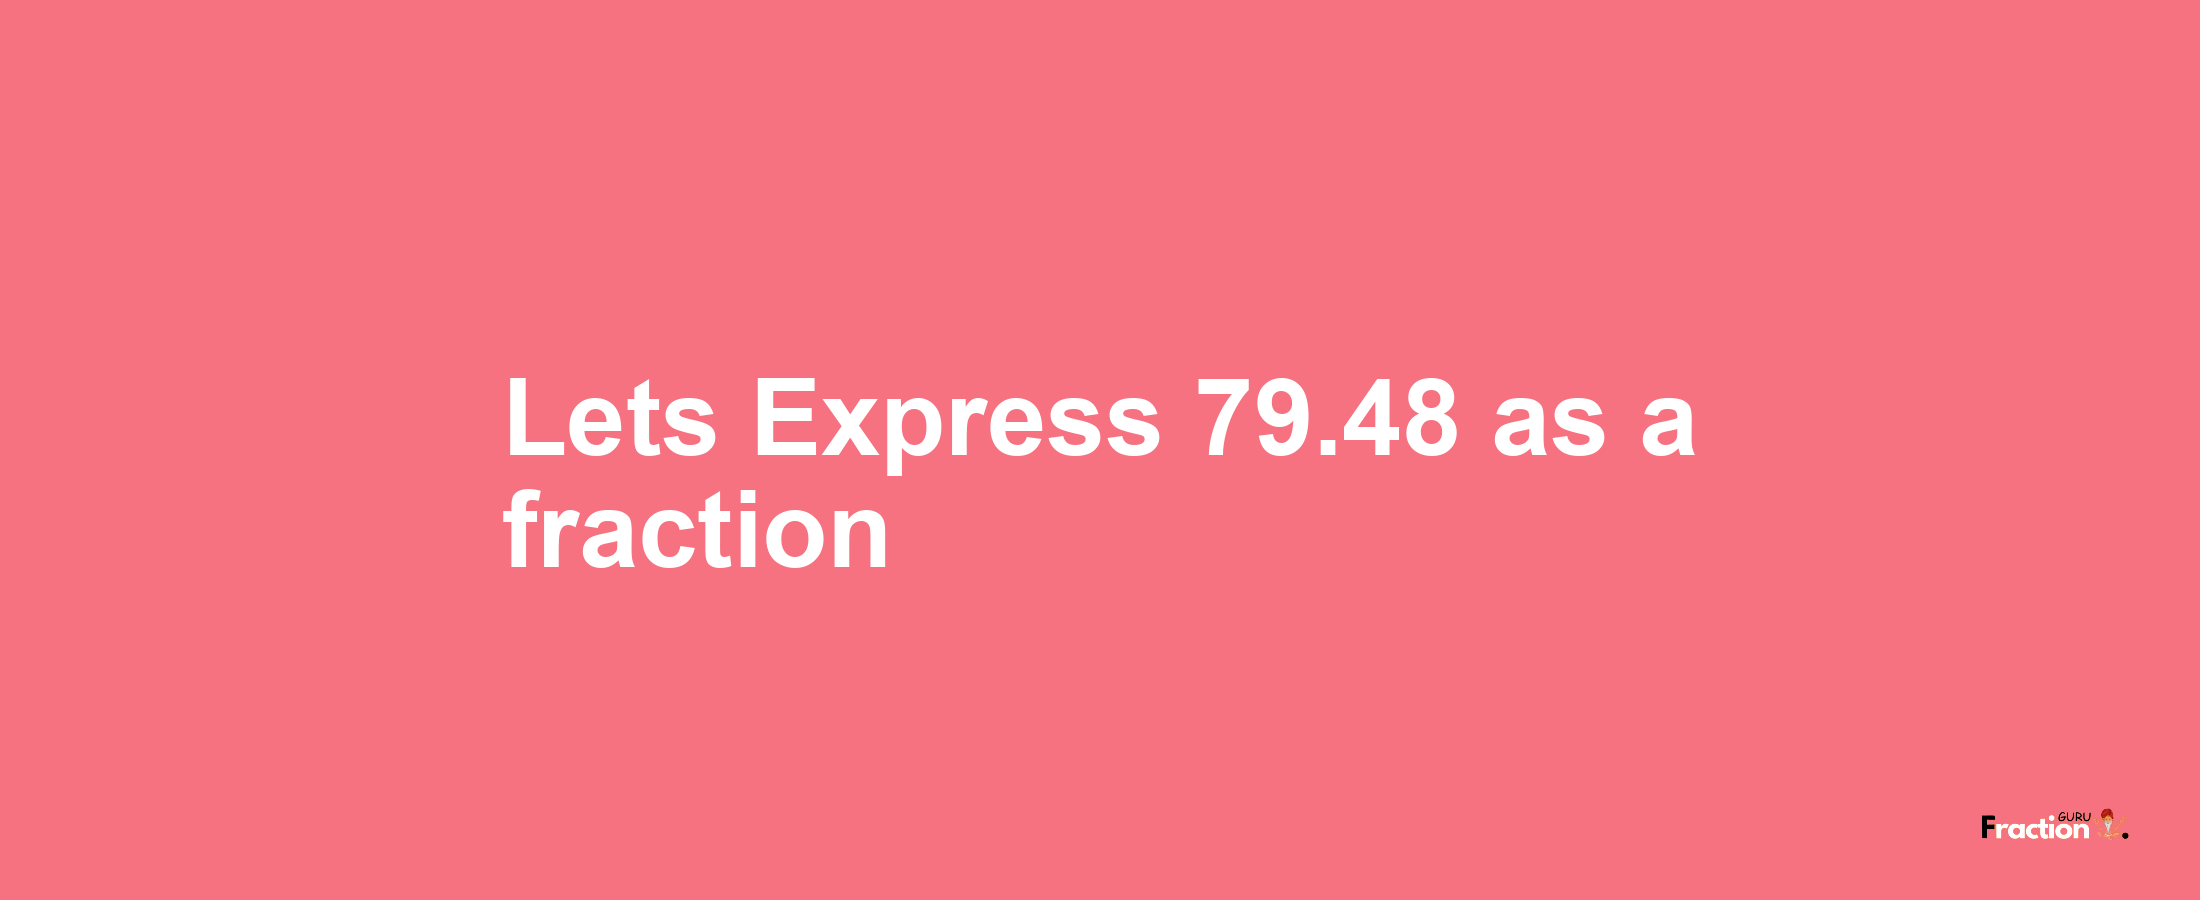 Lets Express 79.48 as afraction